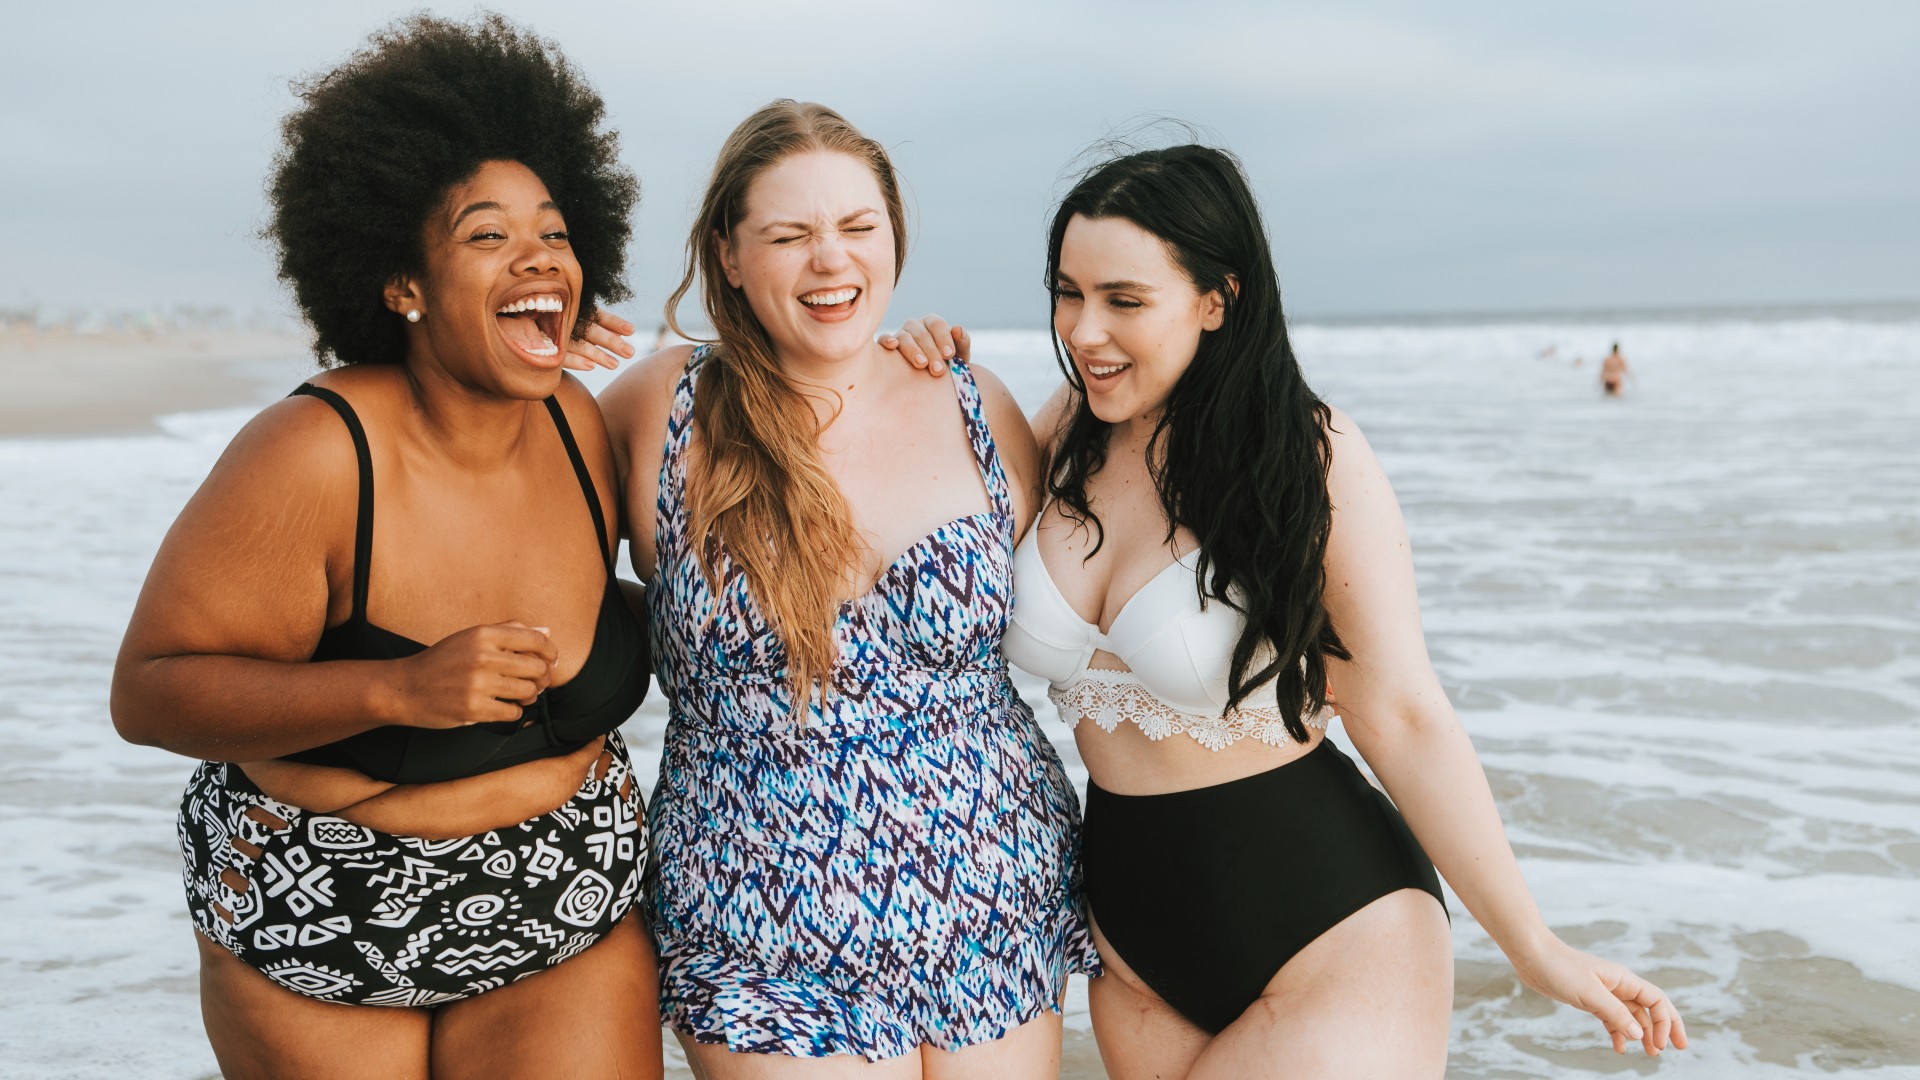 Bathing Suits for Different Body Types